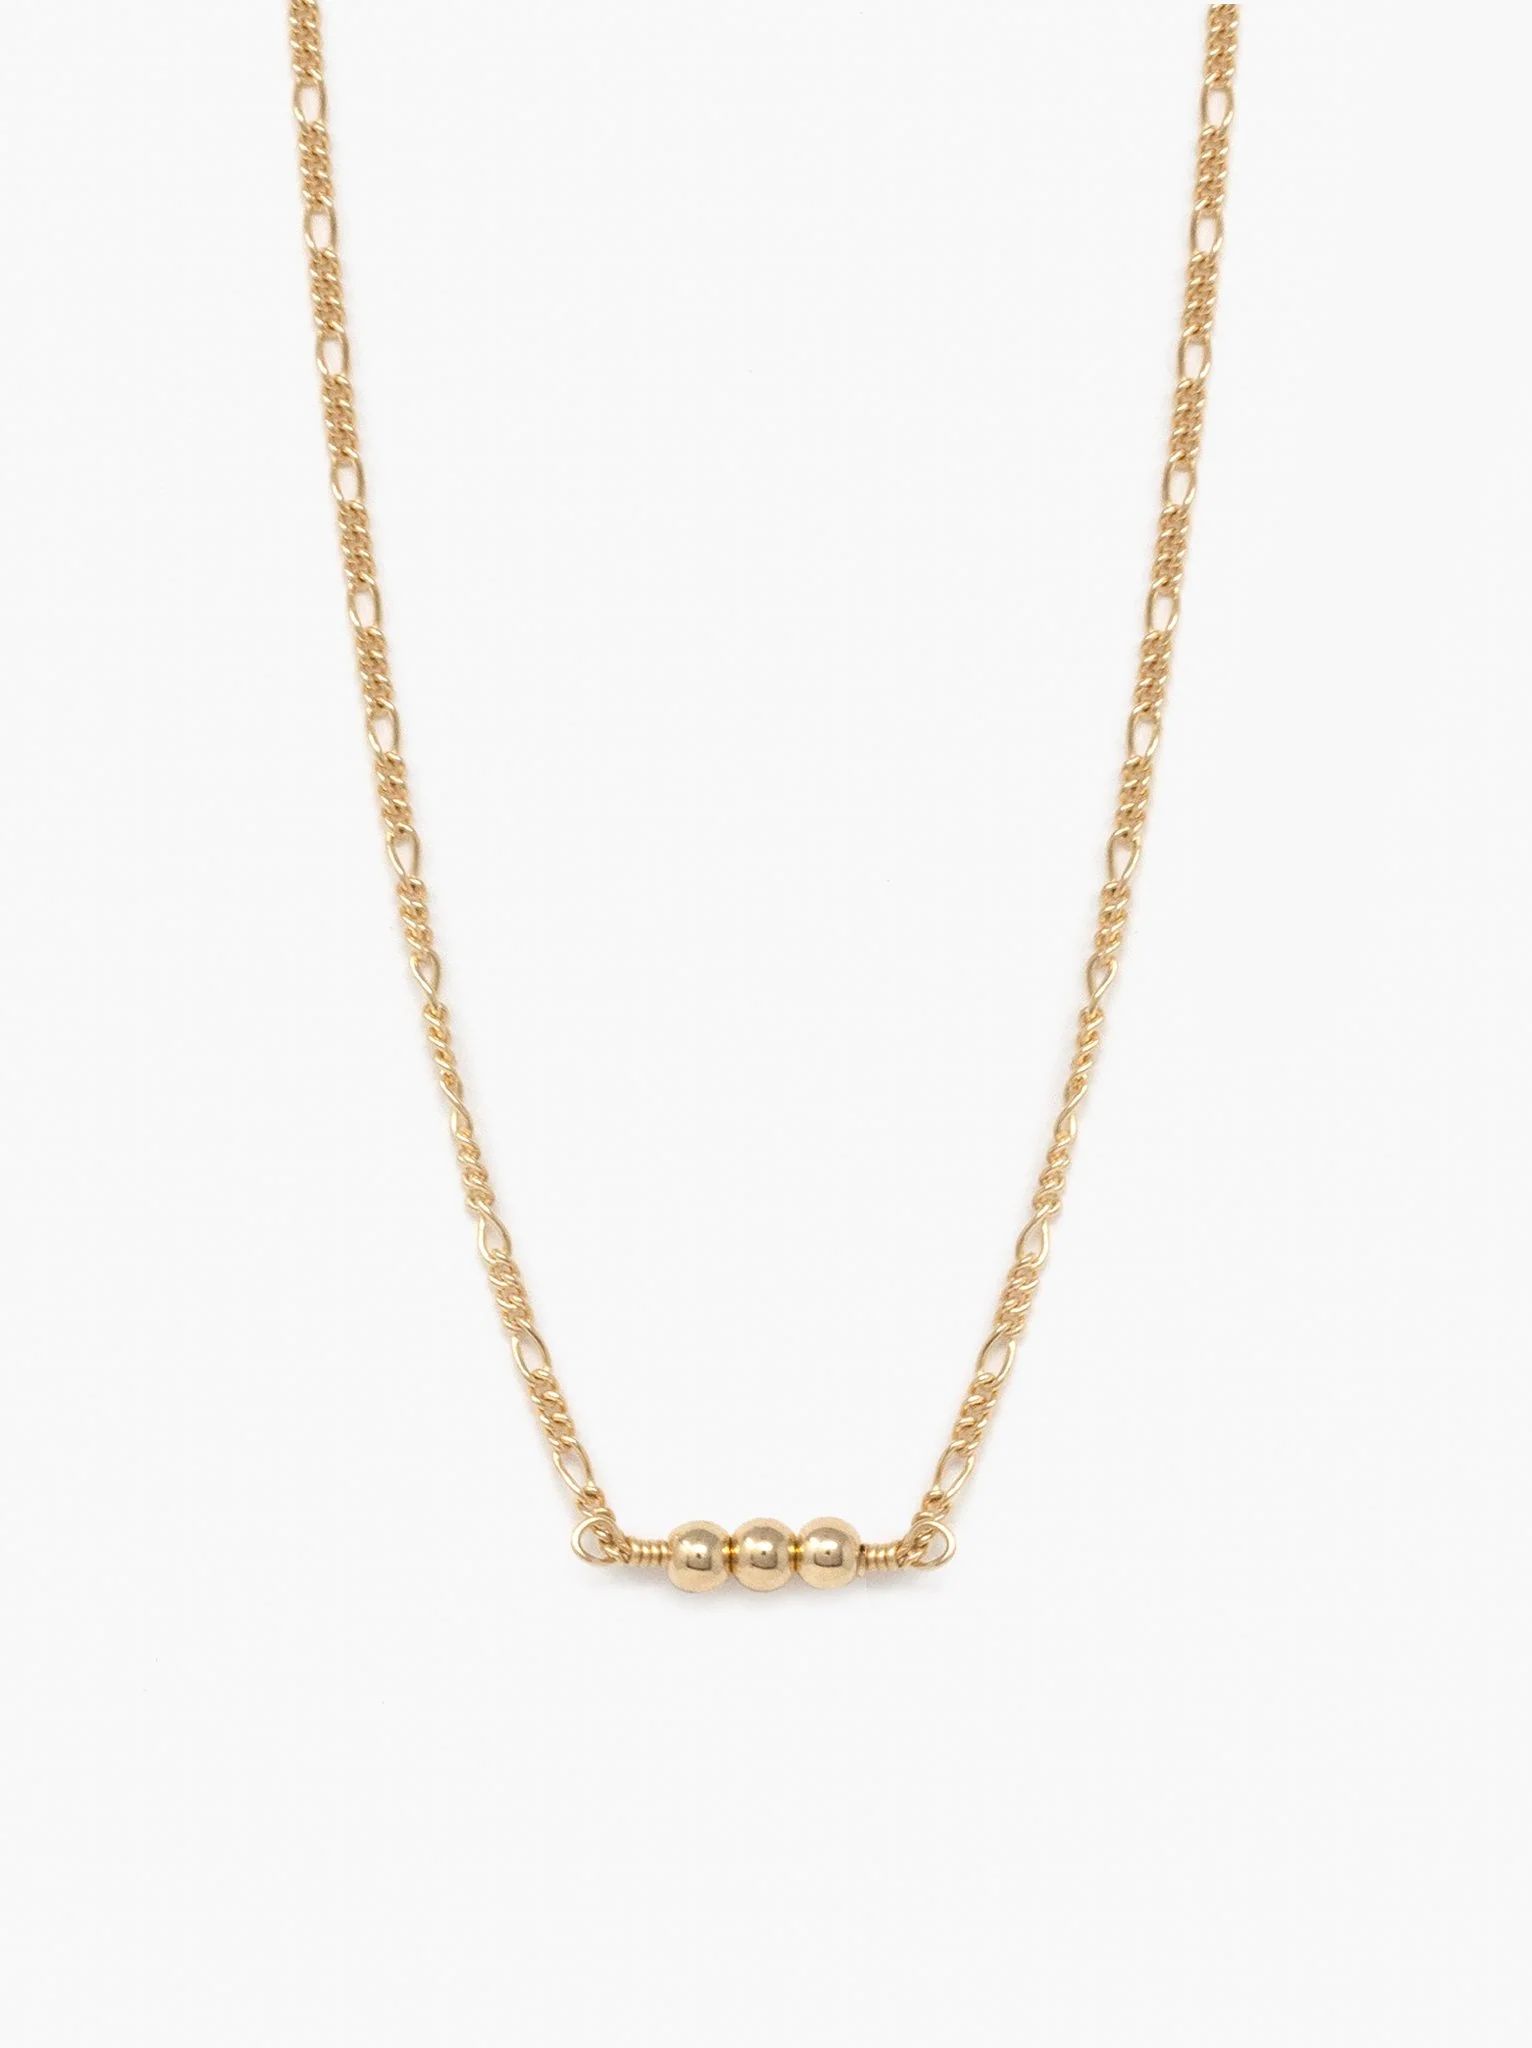 Serendipity Necklace | ABLE